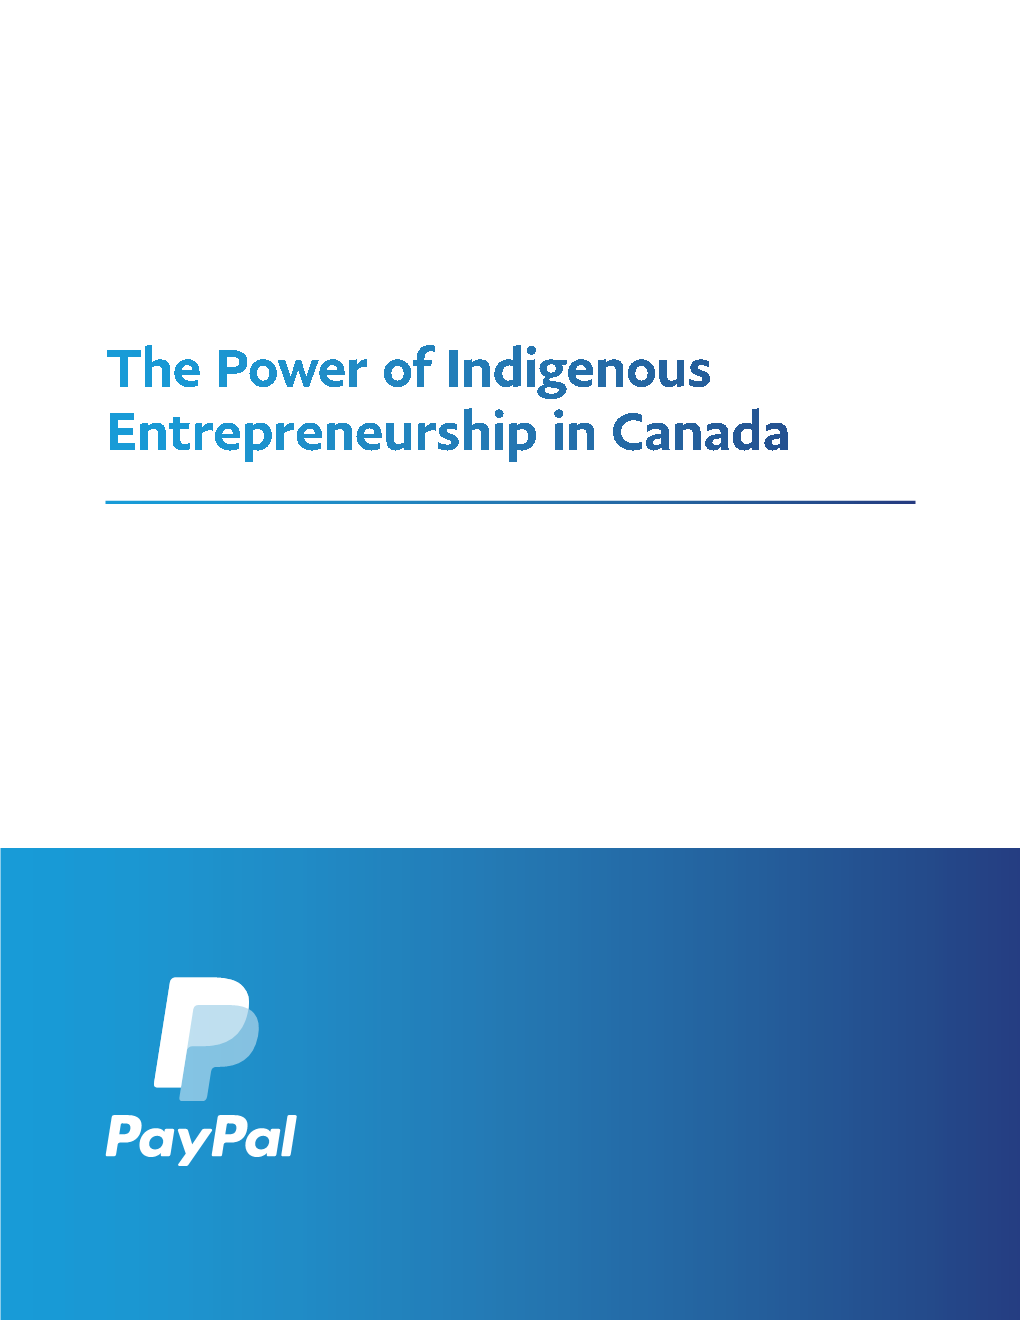 The Power of Indigenous Entrepreneurship in Canada Acknowledgment